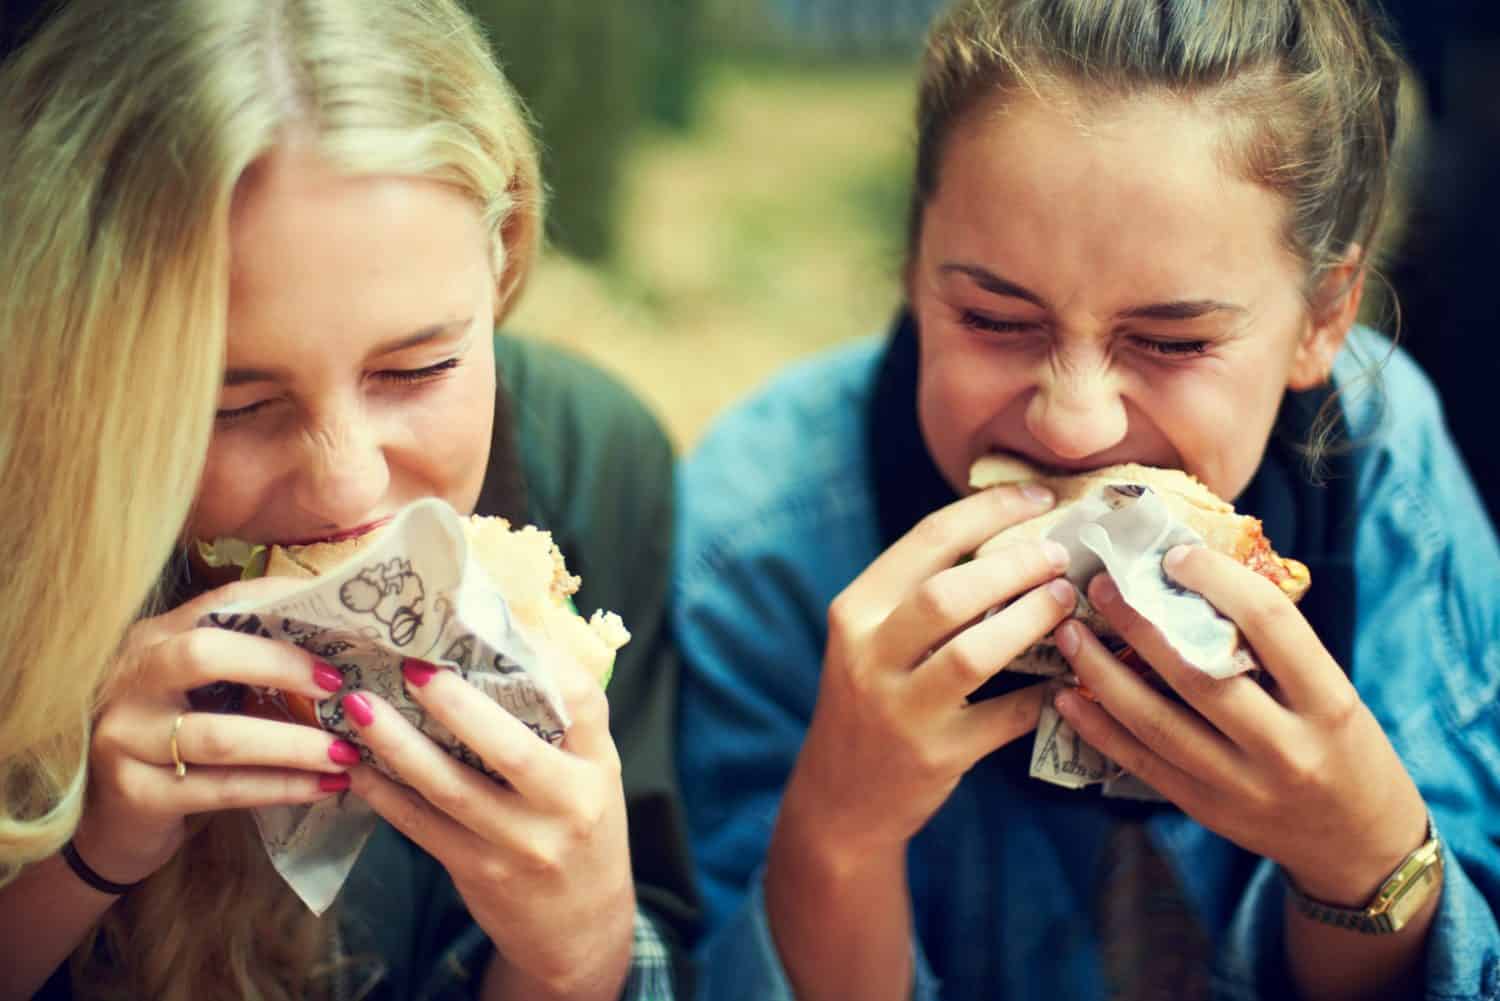 Got the munchies. Shot of two young women eating at an outdoor festival.